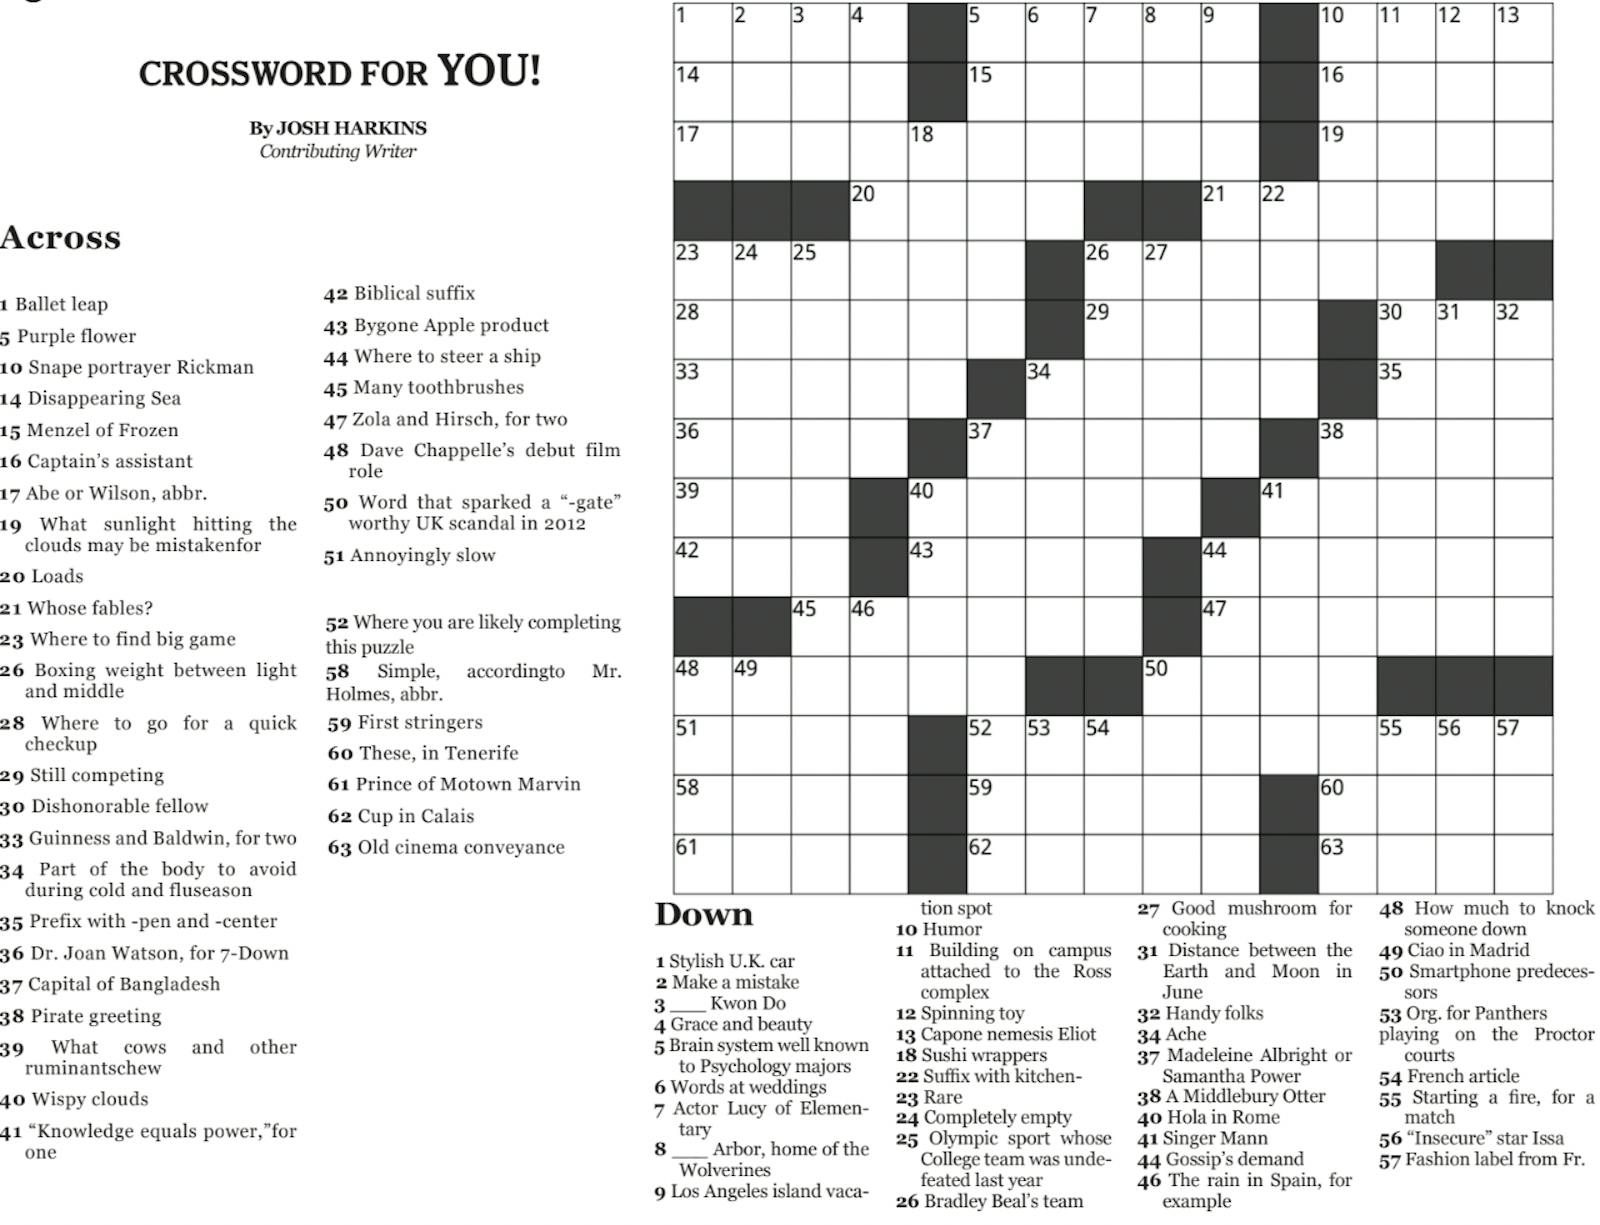 Crossword 10/13 The Middlebury Campus